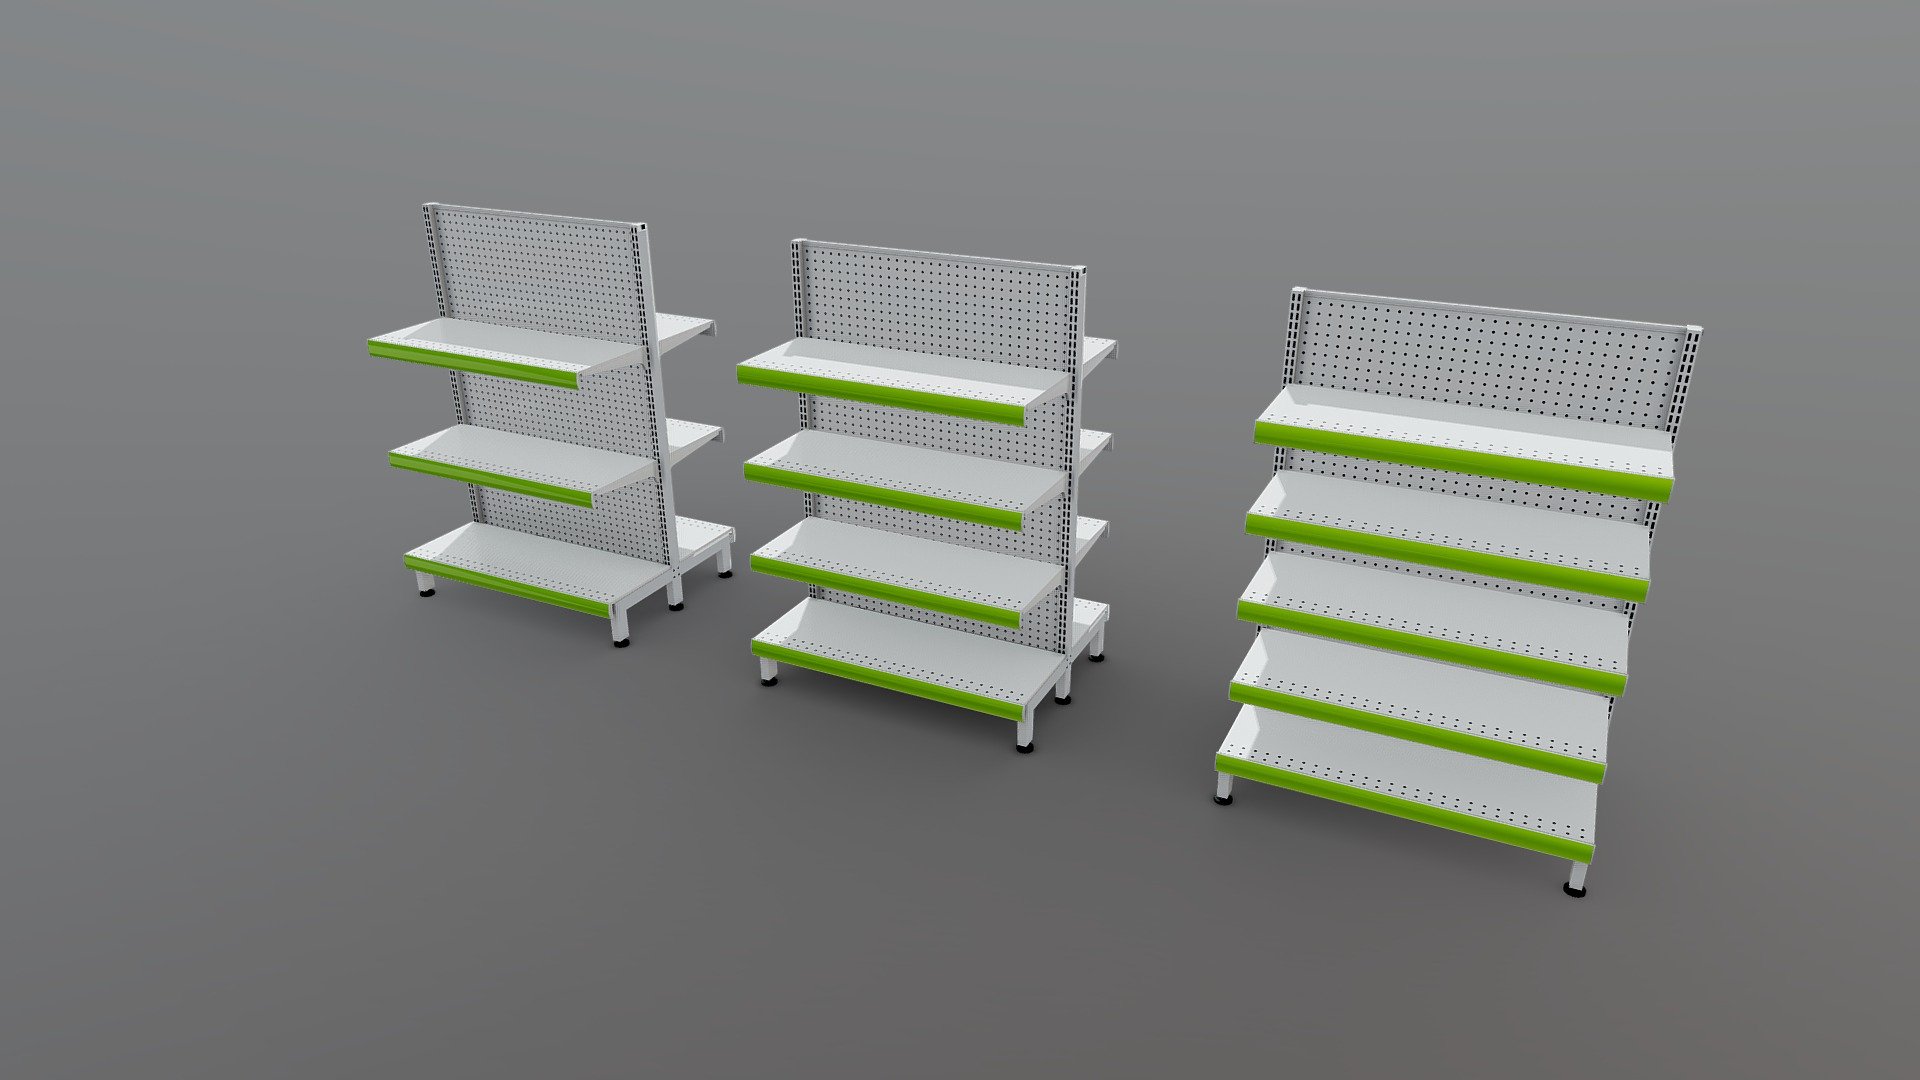 Modular shelves for Hardware Shops or Grocery Stores. With these models you can design various shelves configurations. You can use this 3d model in your games, AR or VR apps, or others projects as you want 3d model